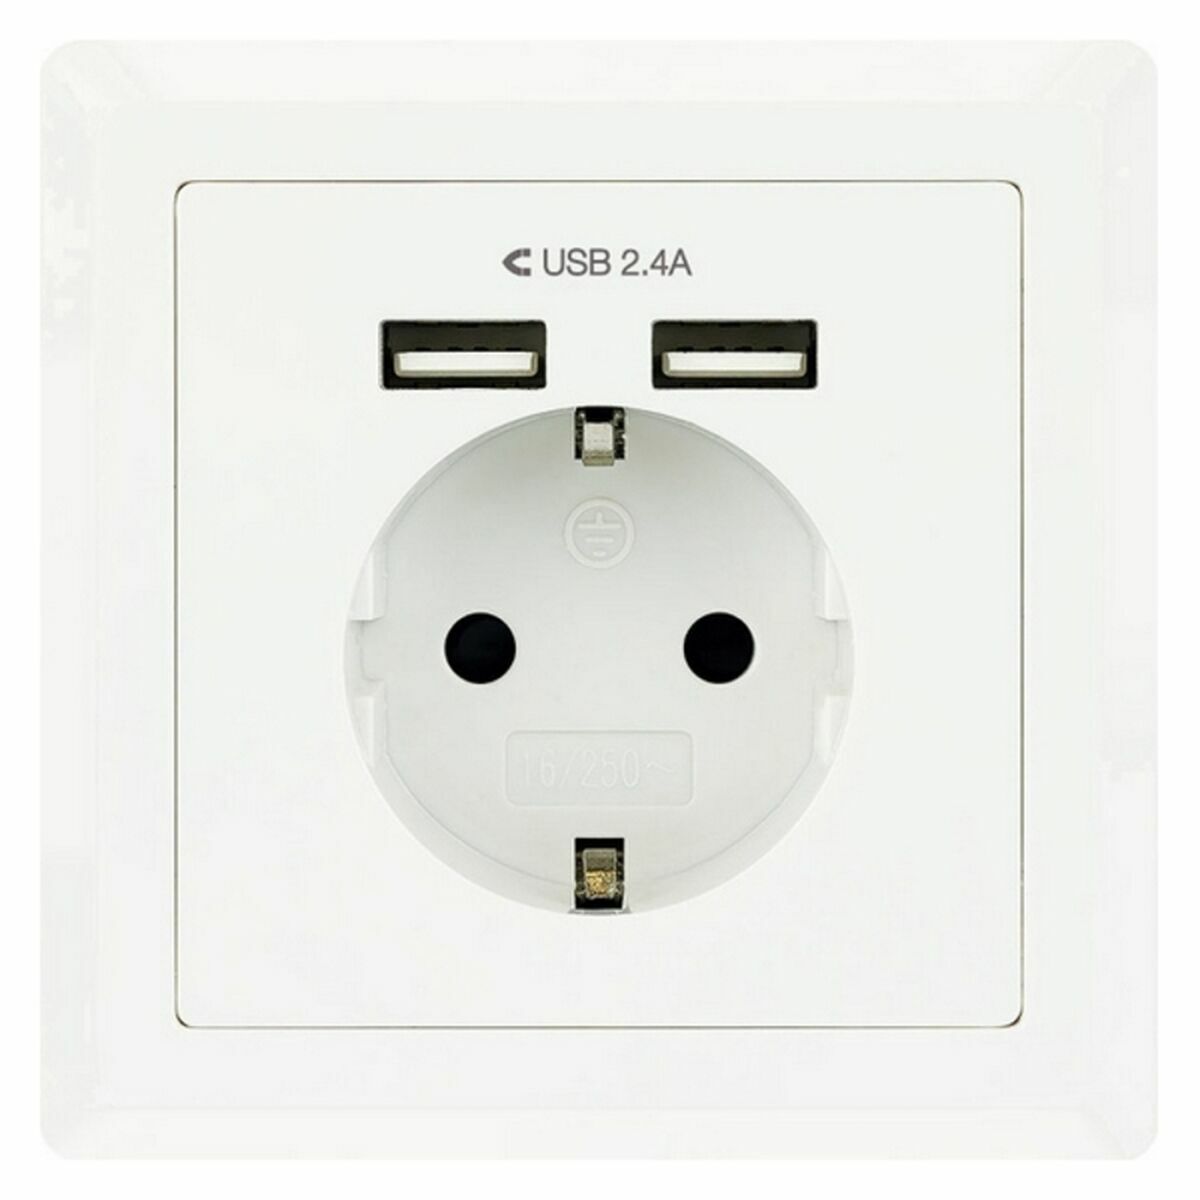 Wall Plug with 2 USB Ports TooQ 10.35.0010 5V/2.4A White 2,4 A, TooQ, DIY and tools, Electrical wiring, wall-plug-with-2-usb-ports-tooq-10-35-0010-5v-2-4a-white-2-4-a, Brand_TooQ, category-reference-2399, category-reference-2468, category-reference-2609, category-reference-2803, category-reference-2821, category-reference-t-10516, category-reference-t-10569, category-reference-t-10572, category-reference-t-19651, Condition_NEW, ferretería, Price_20 - 50, RiotNook